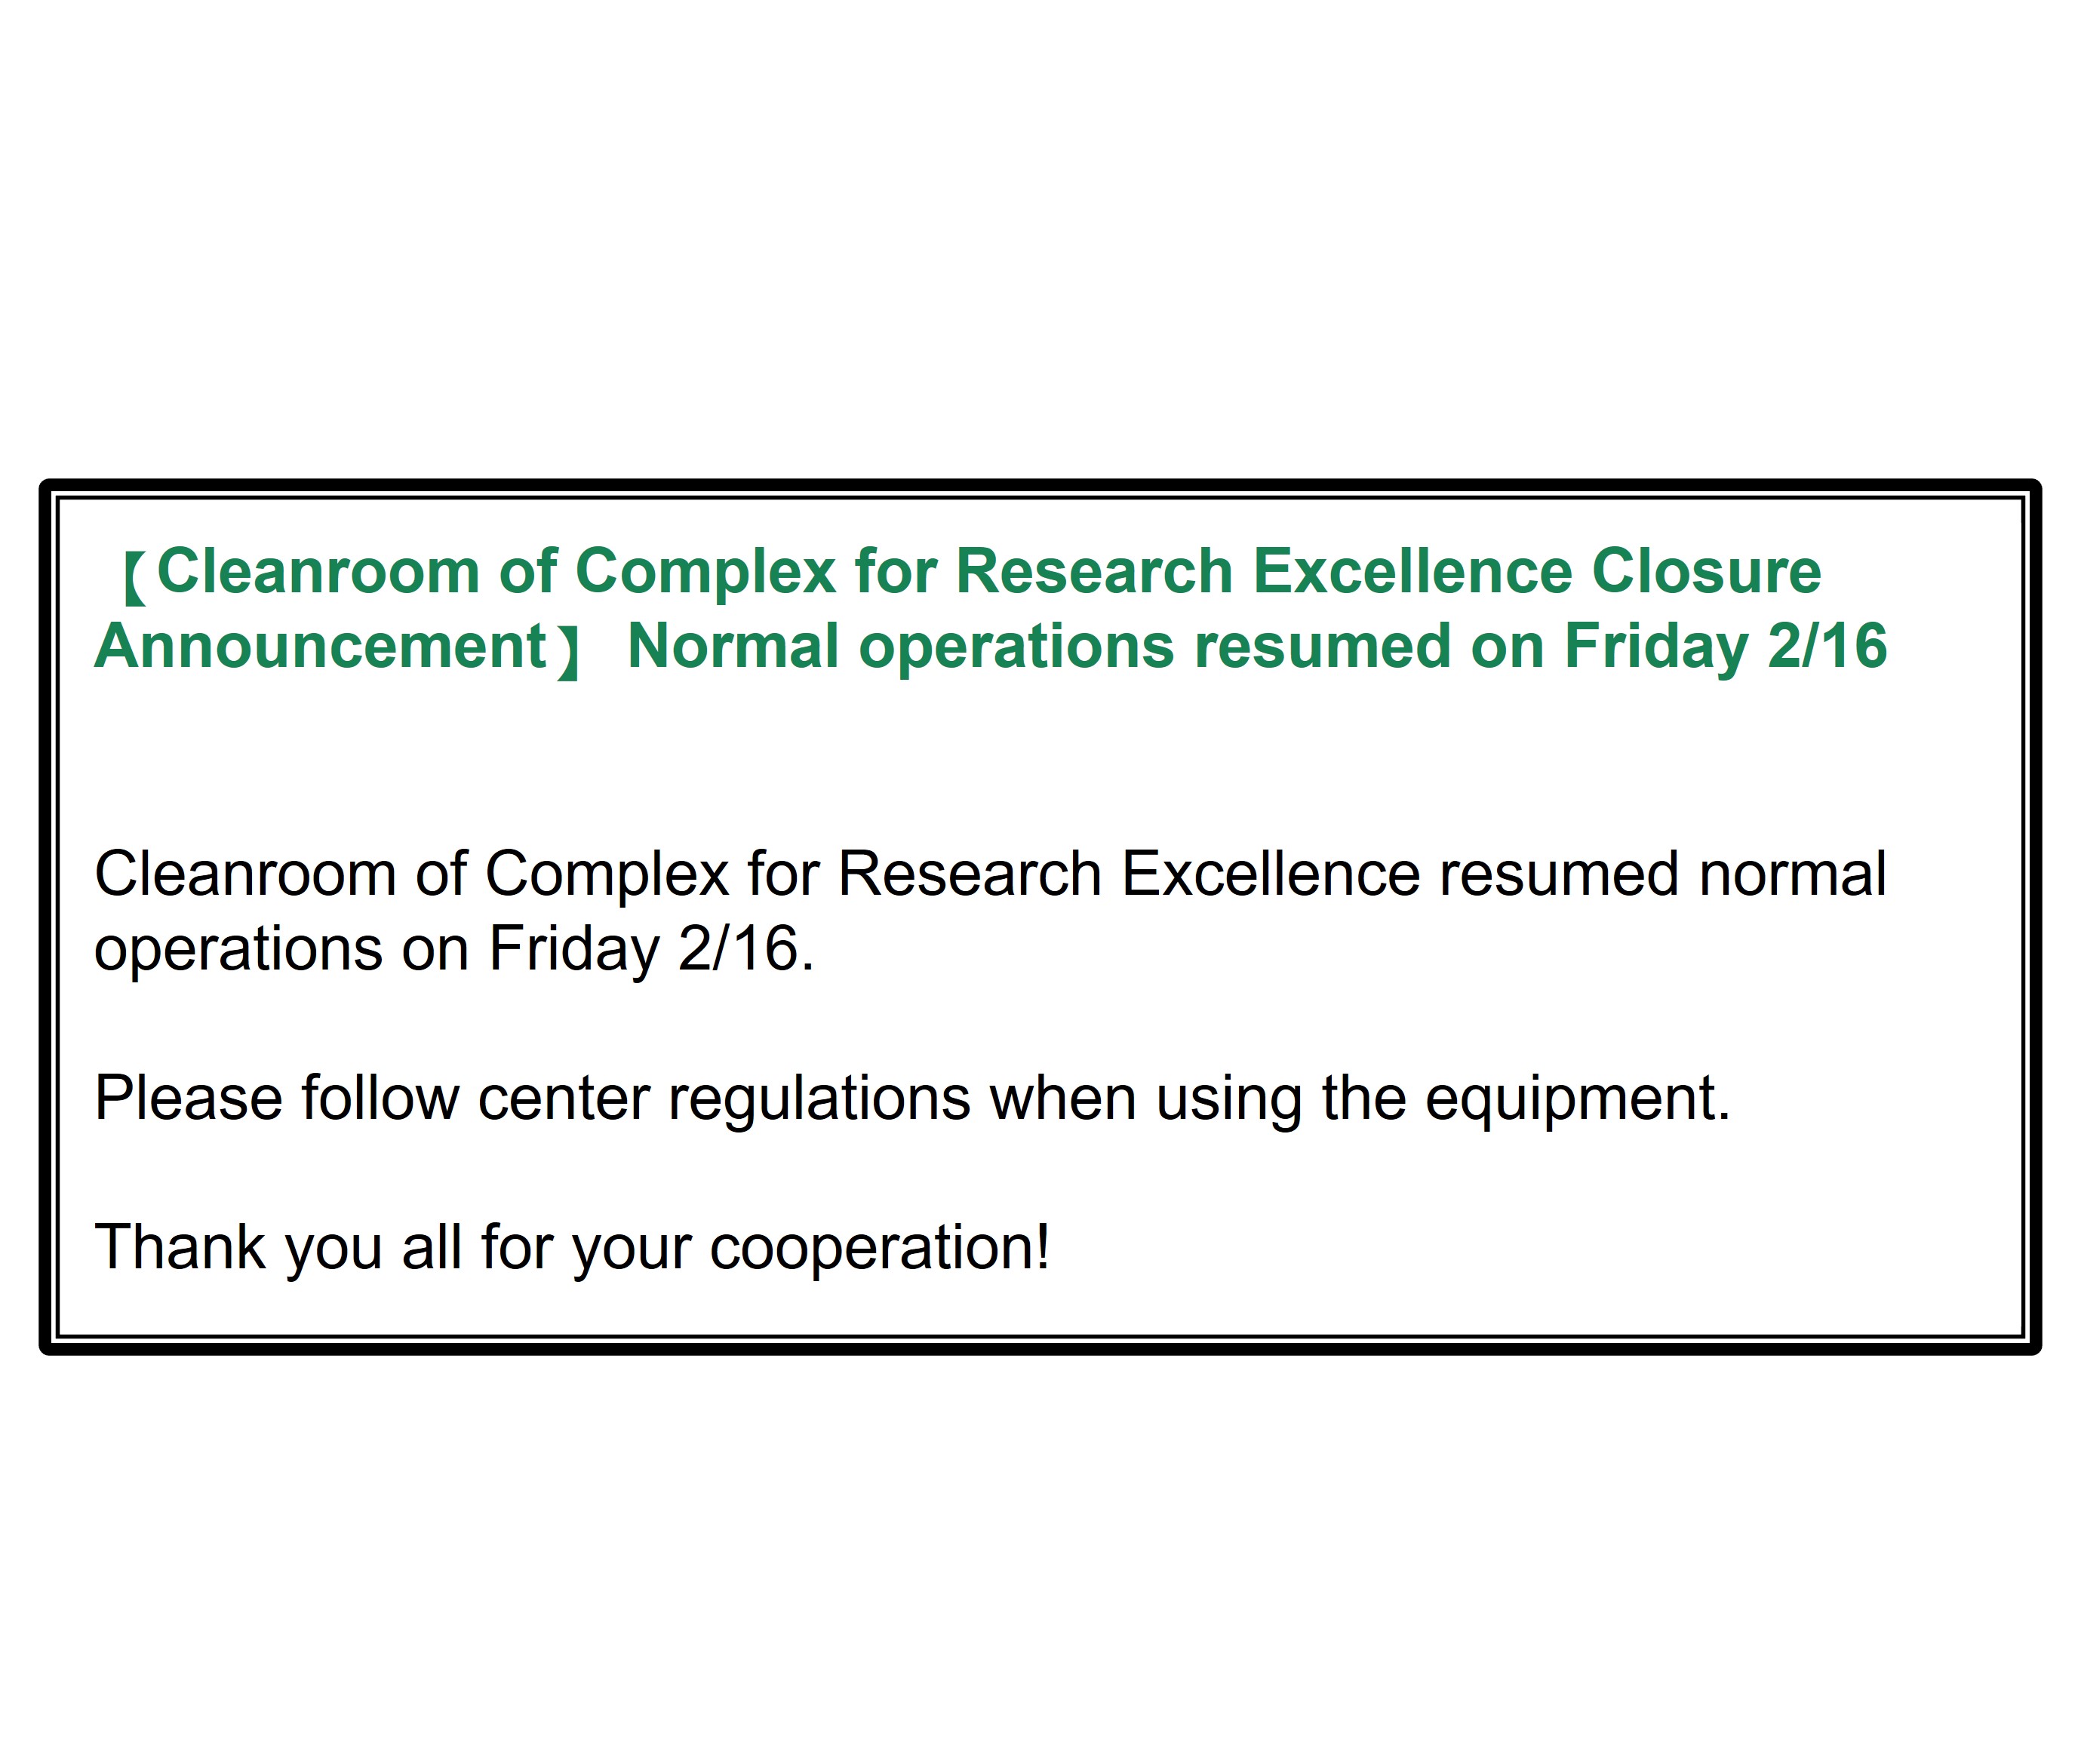 【Cleanroom of Complex for Research Excellence Closure Announcement】 Normal operations resumed on Friday 2/16